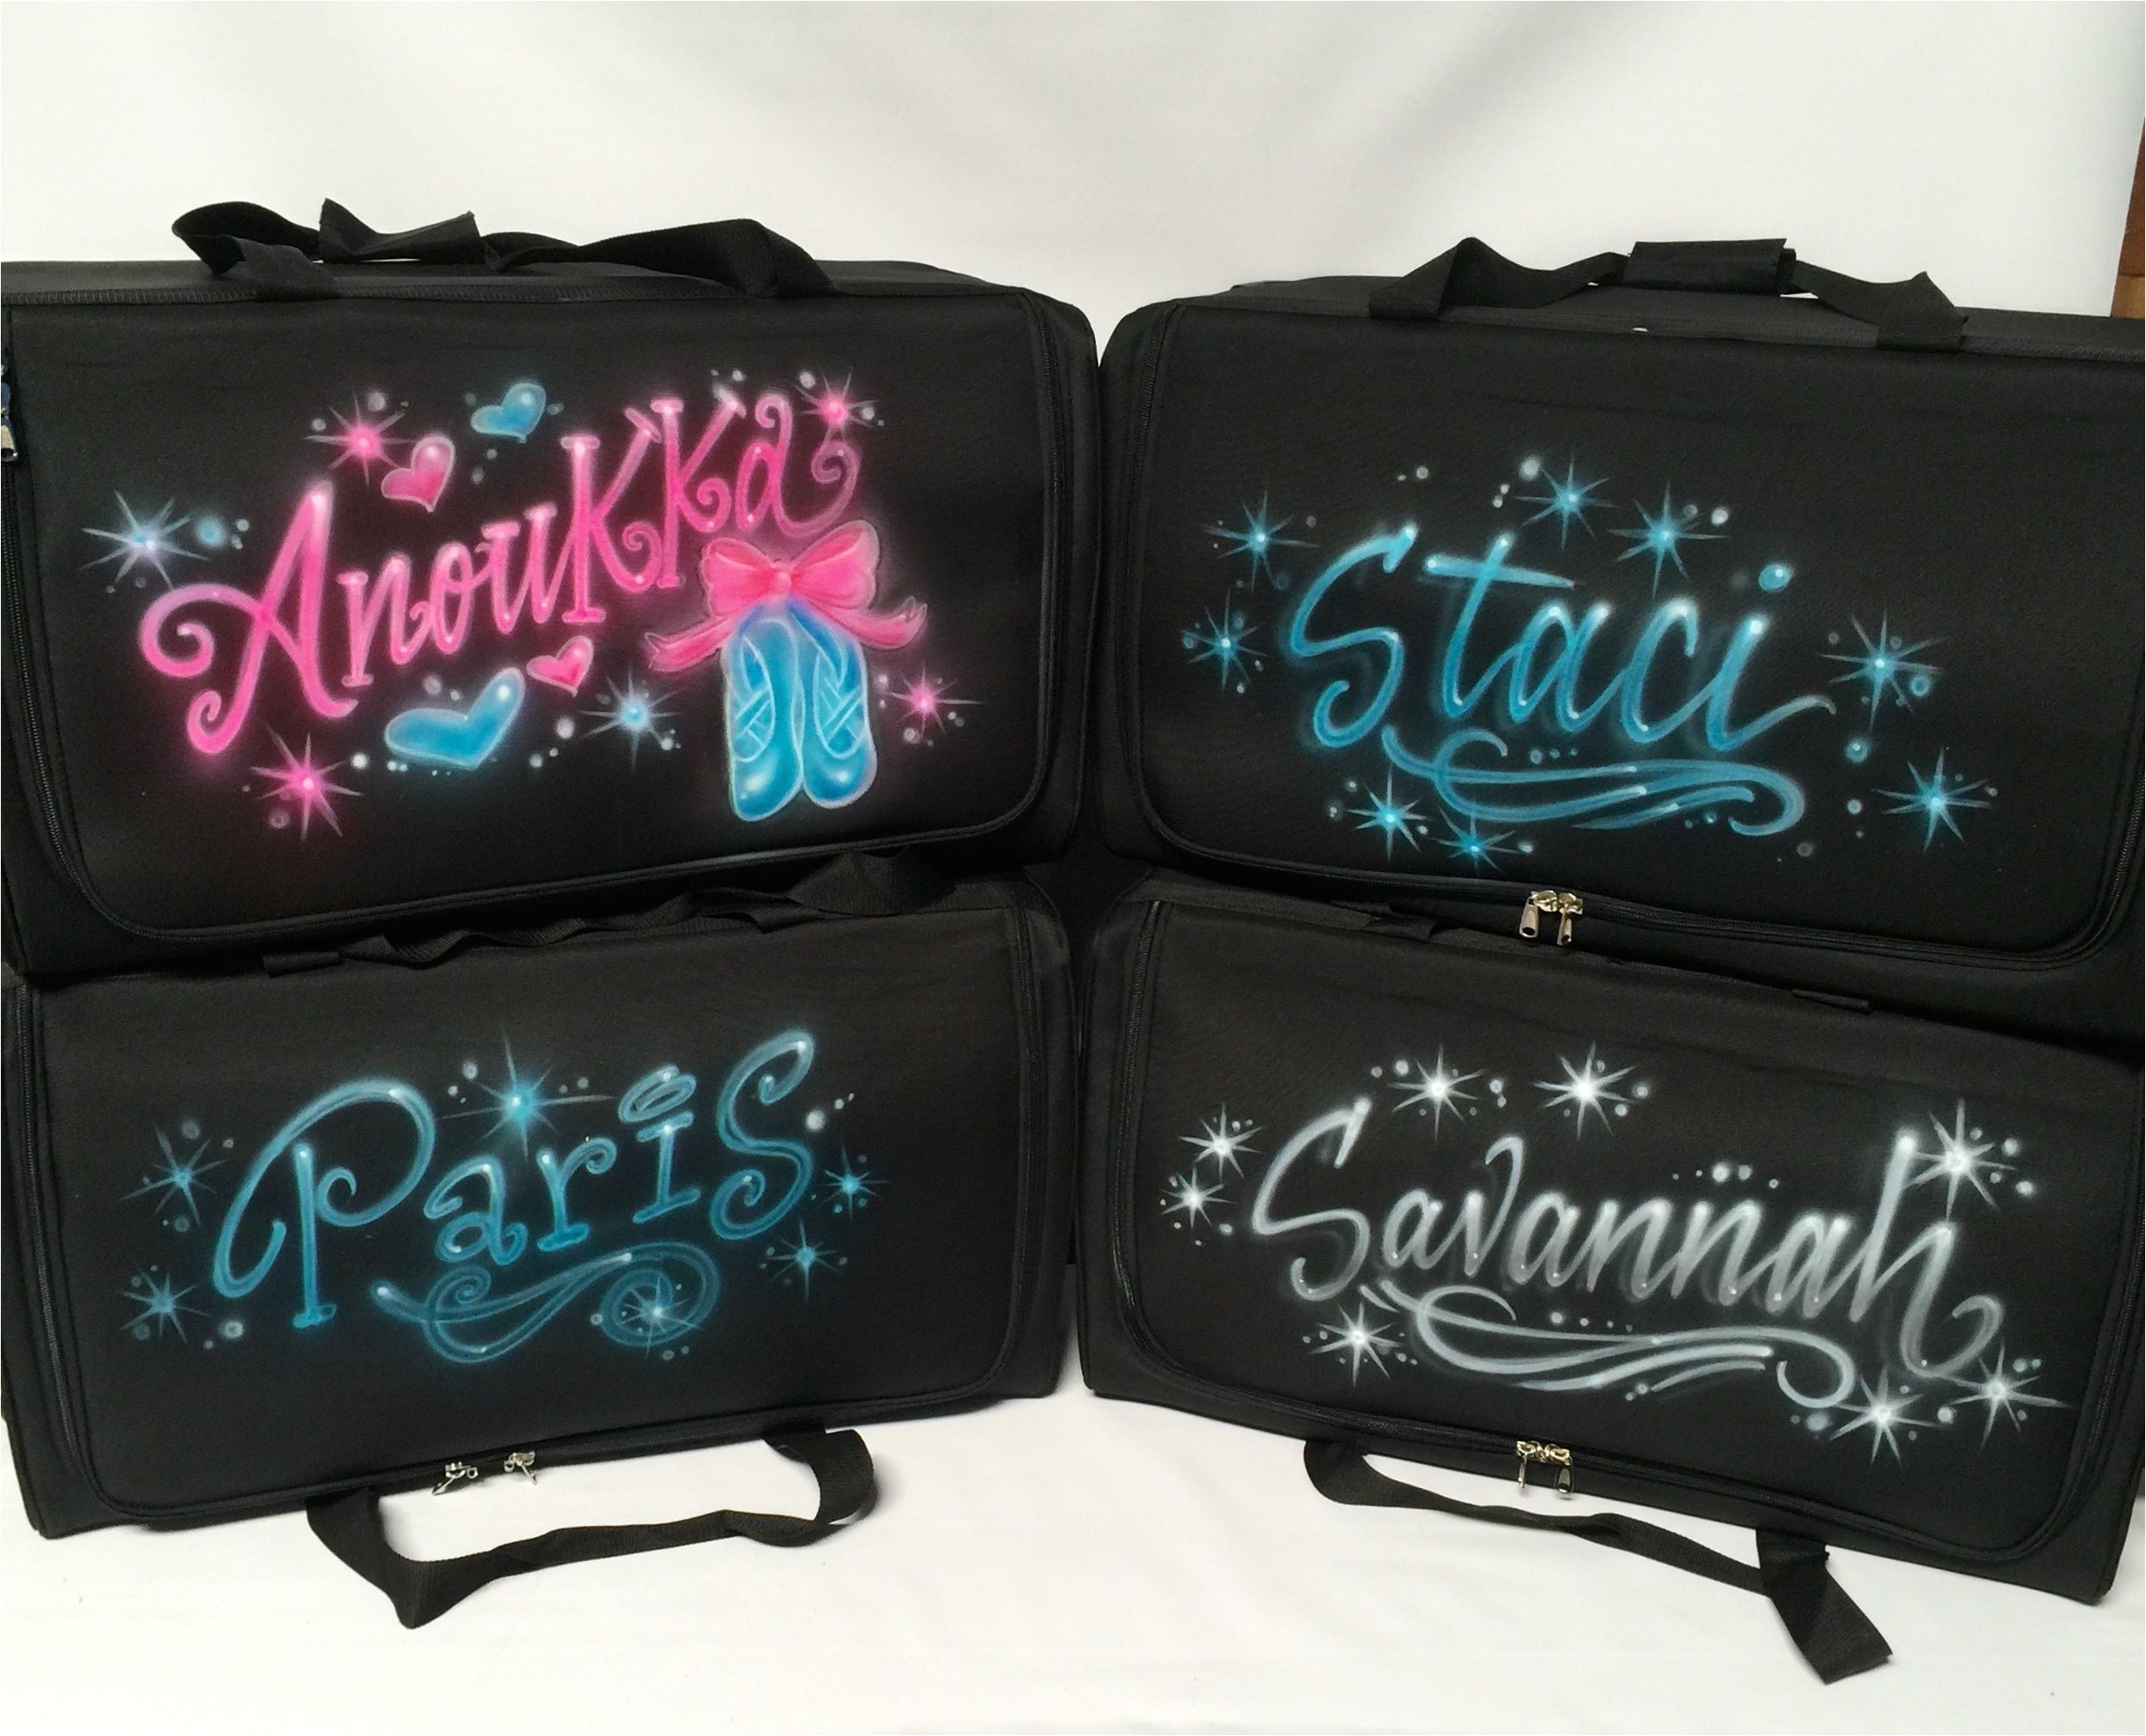 custom airbrush design personalized bags each one is a unique work of art rac n